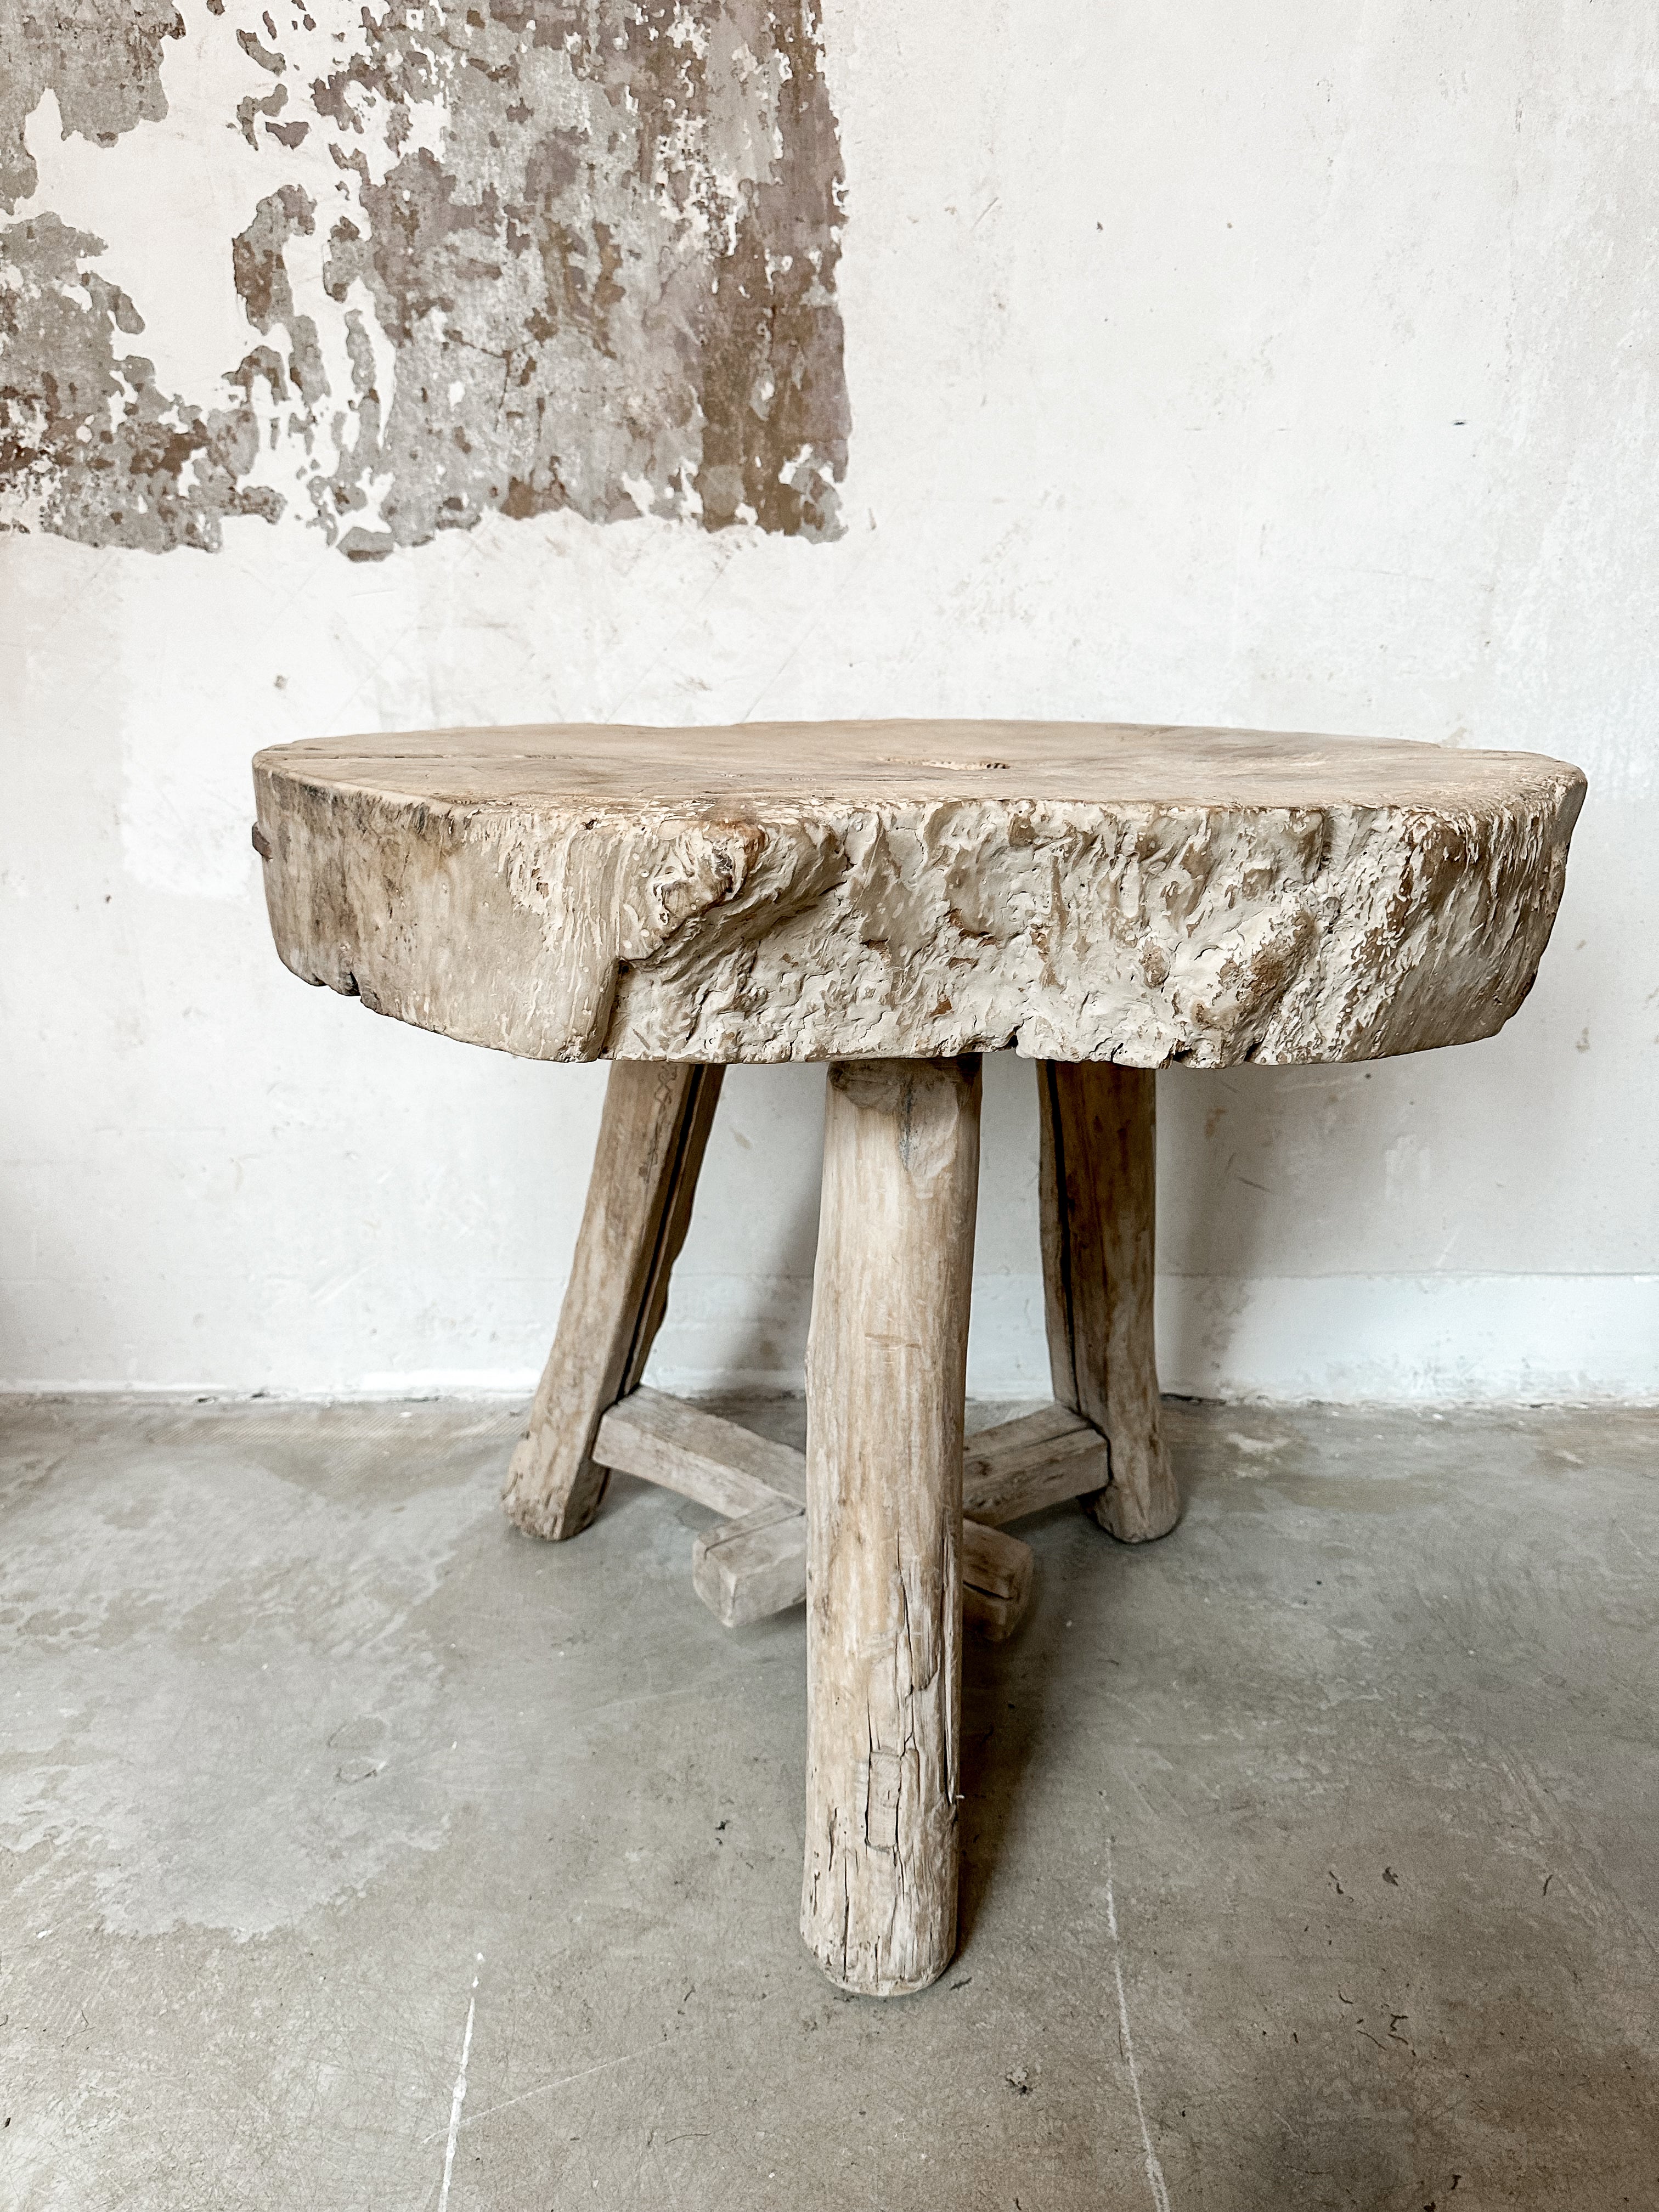 The rustic white side table